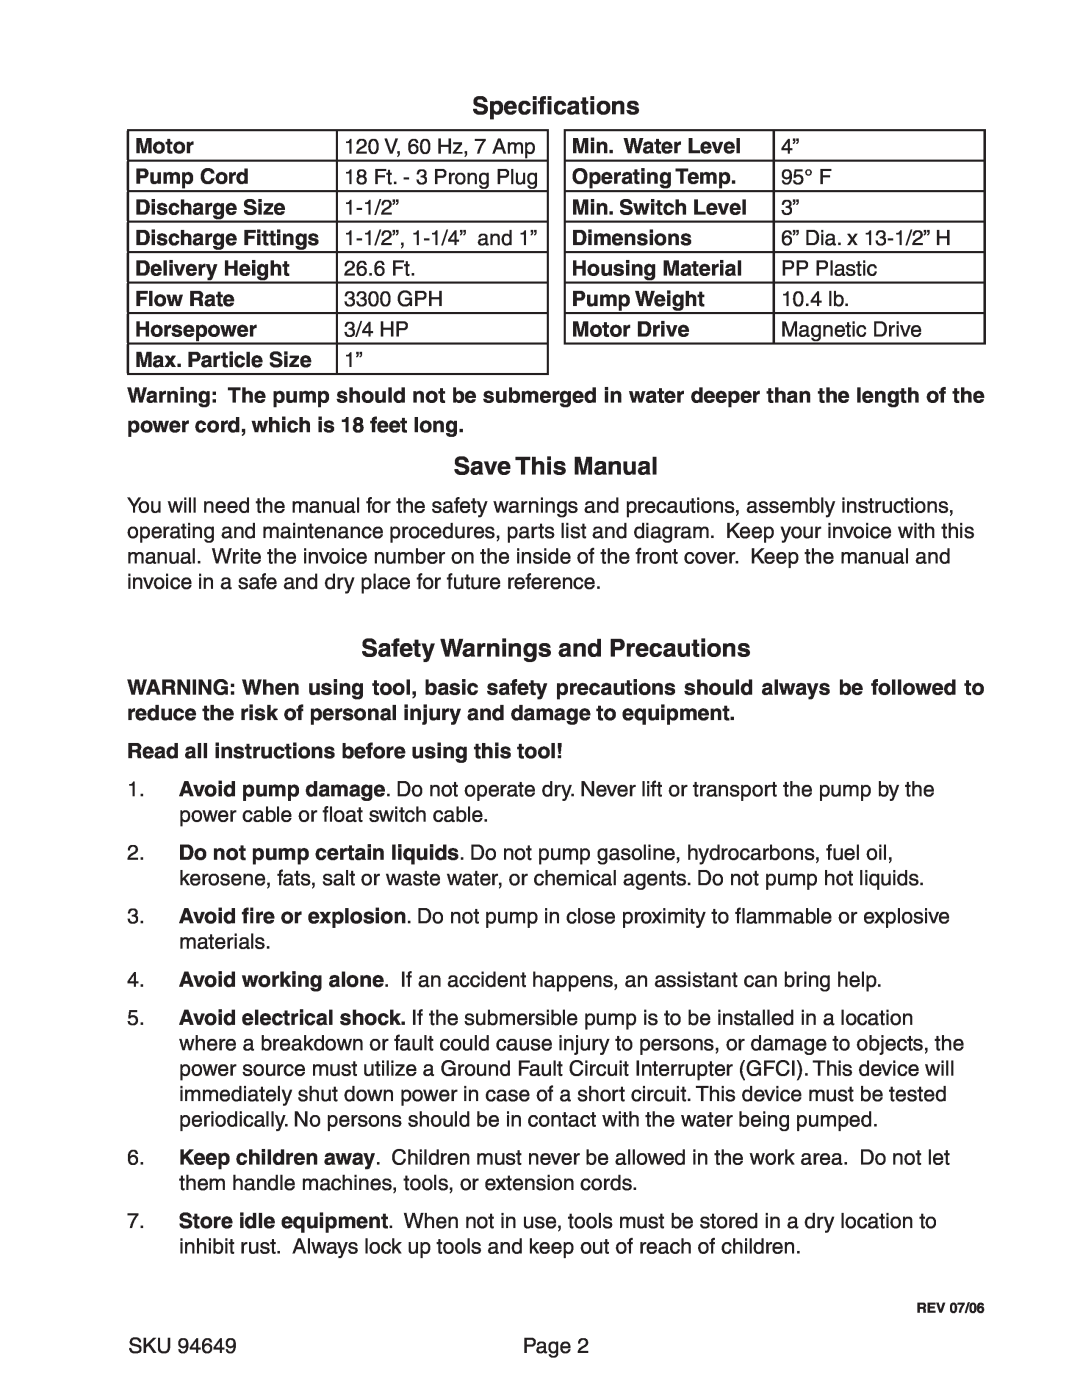 Chicago Electric 94649 operating instructions Specifications, Save This Manual, Safety Warnings and Precautions 